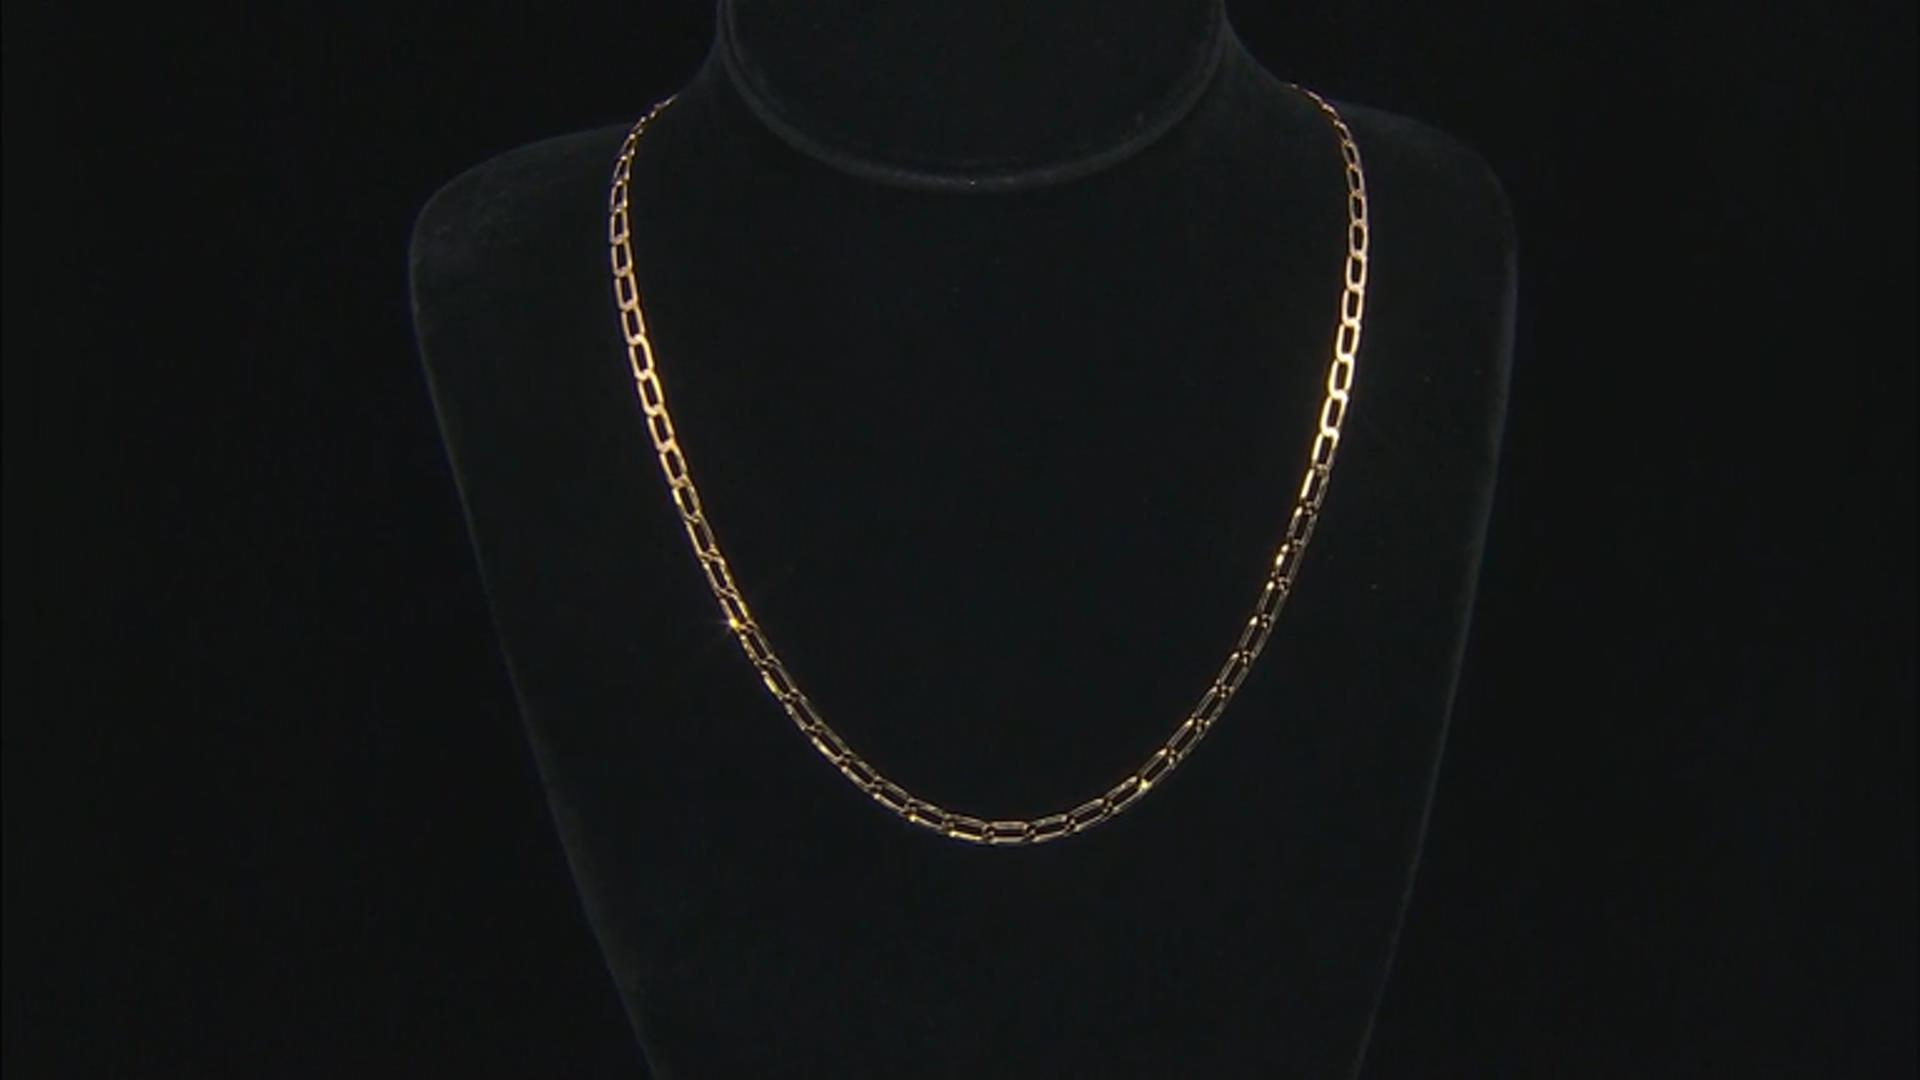 18K Yellow Gold Over Sterling Silver Flat Paperclip 24 Inch Chain Necklace Video Thumbnail